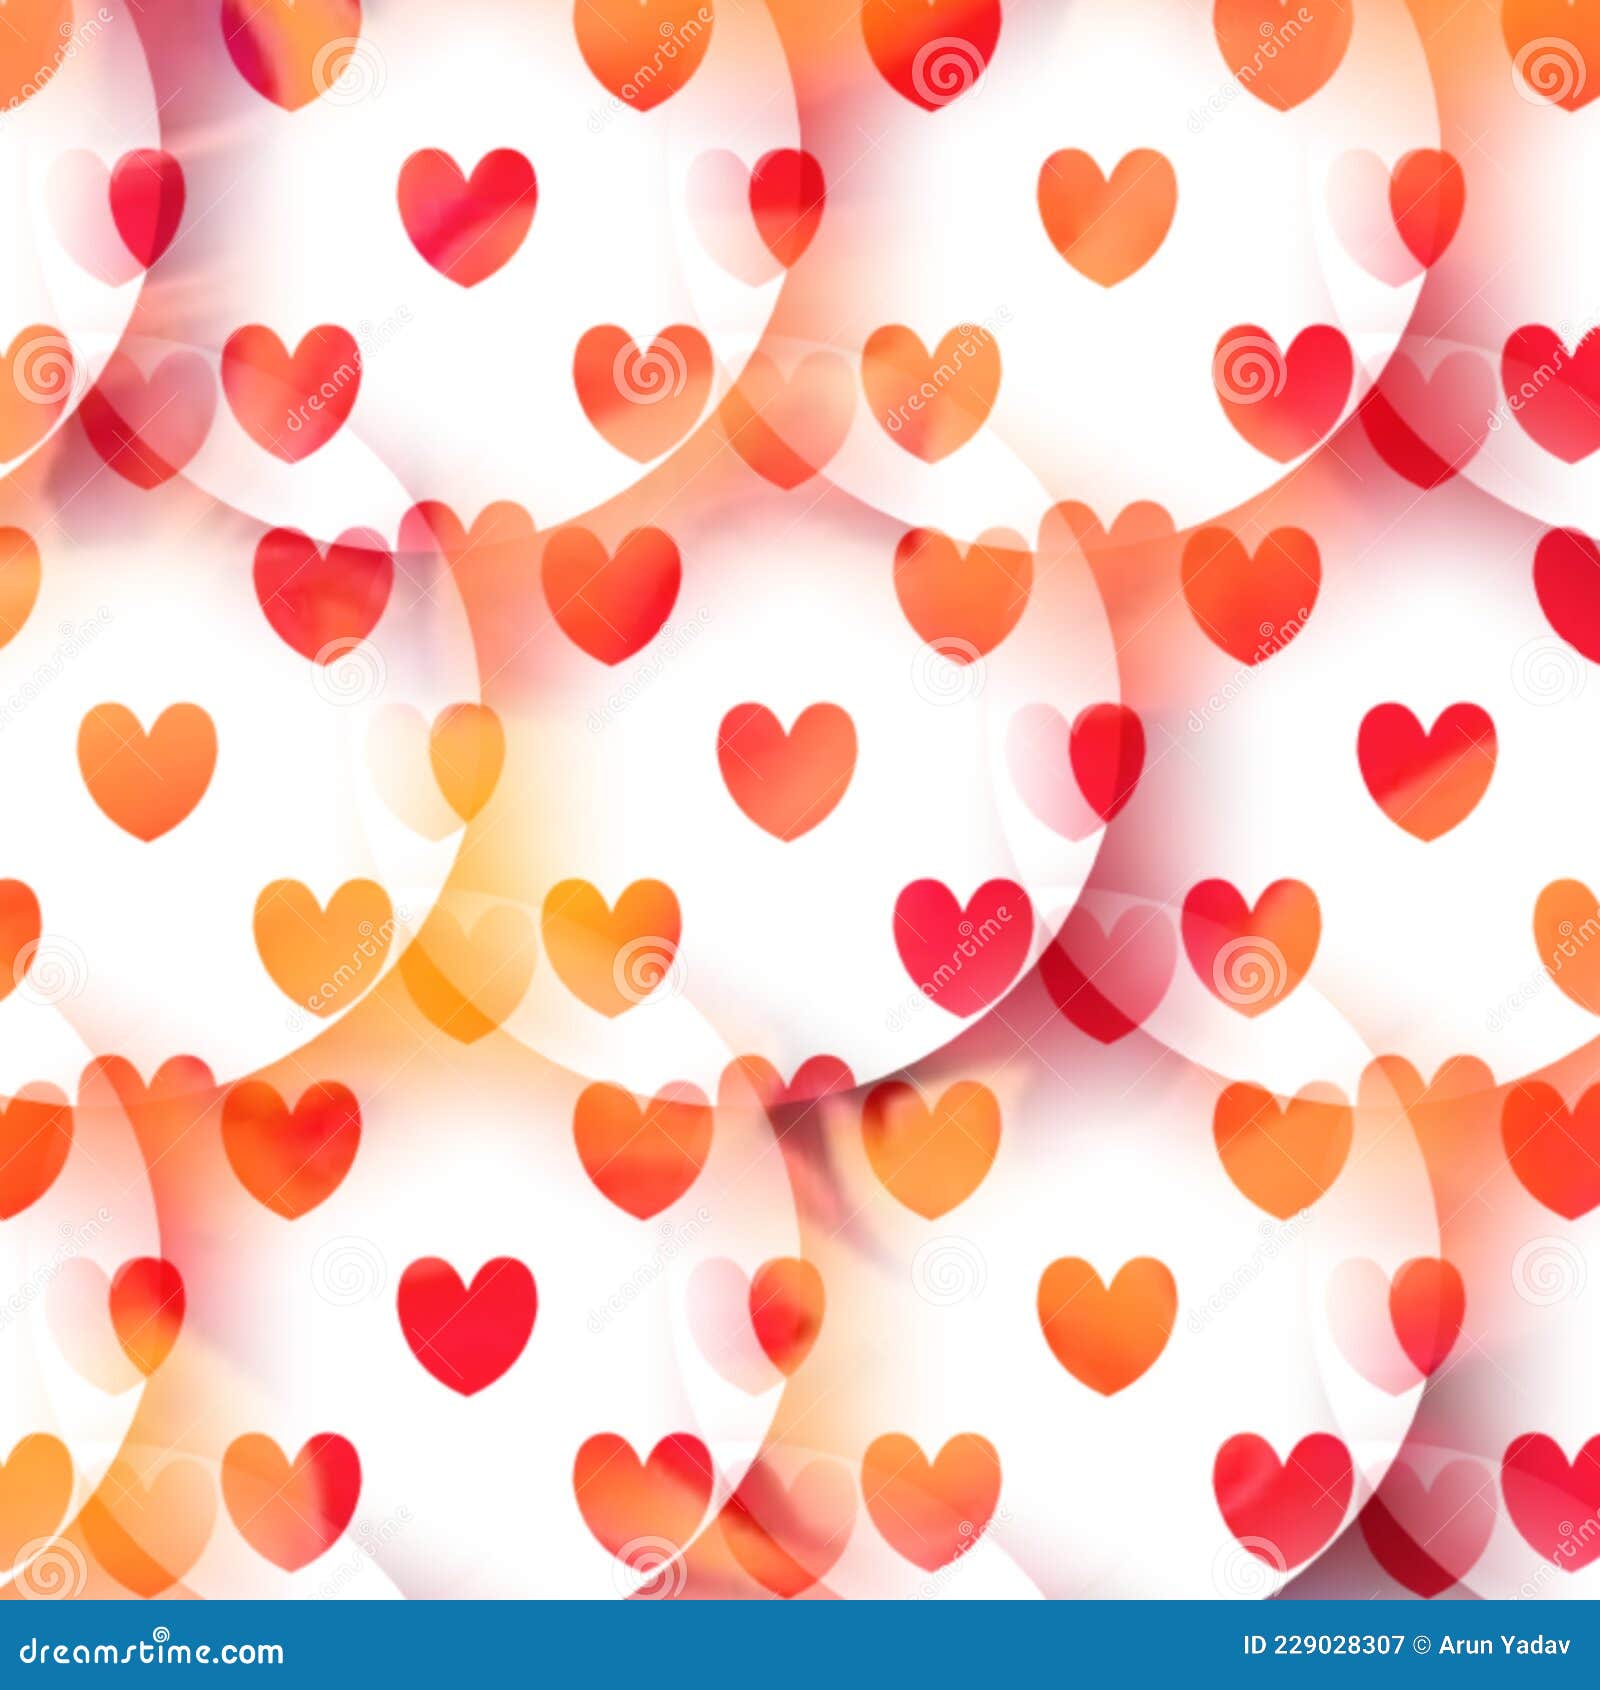 abstract love valentine day background.